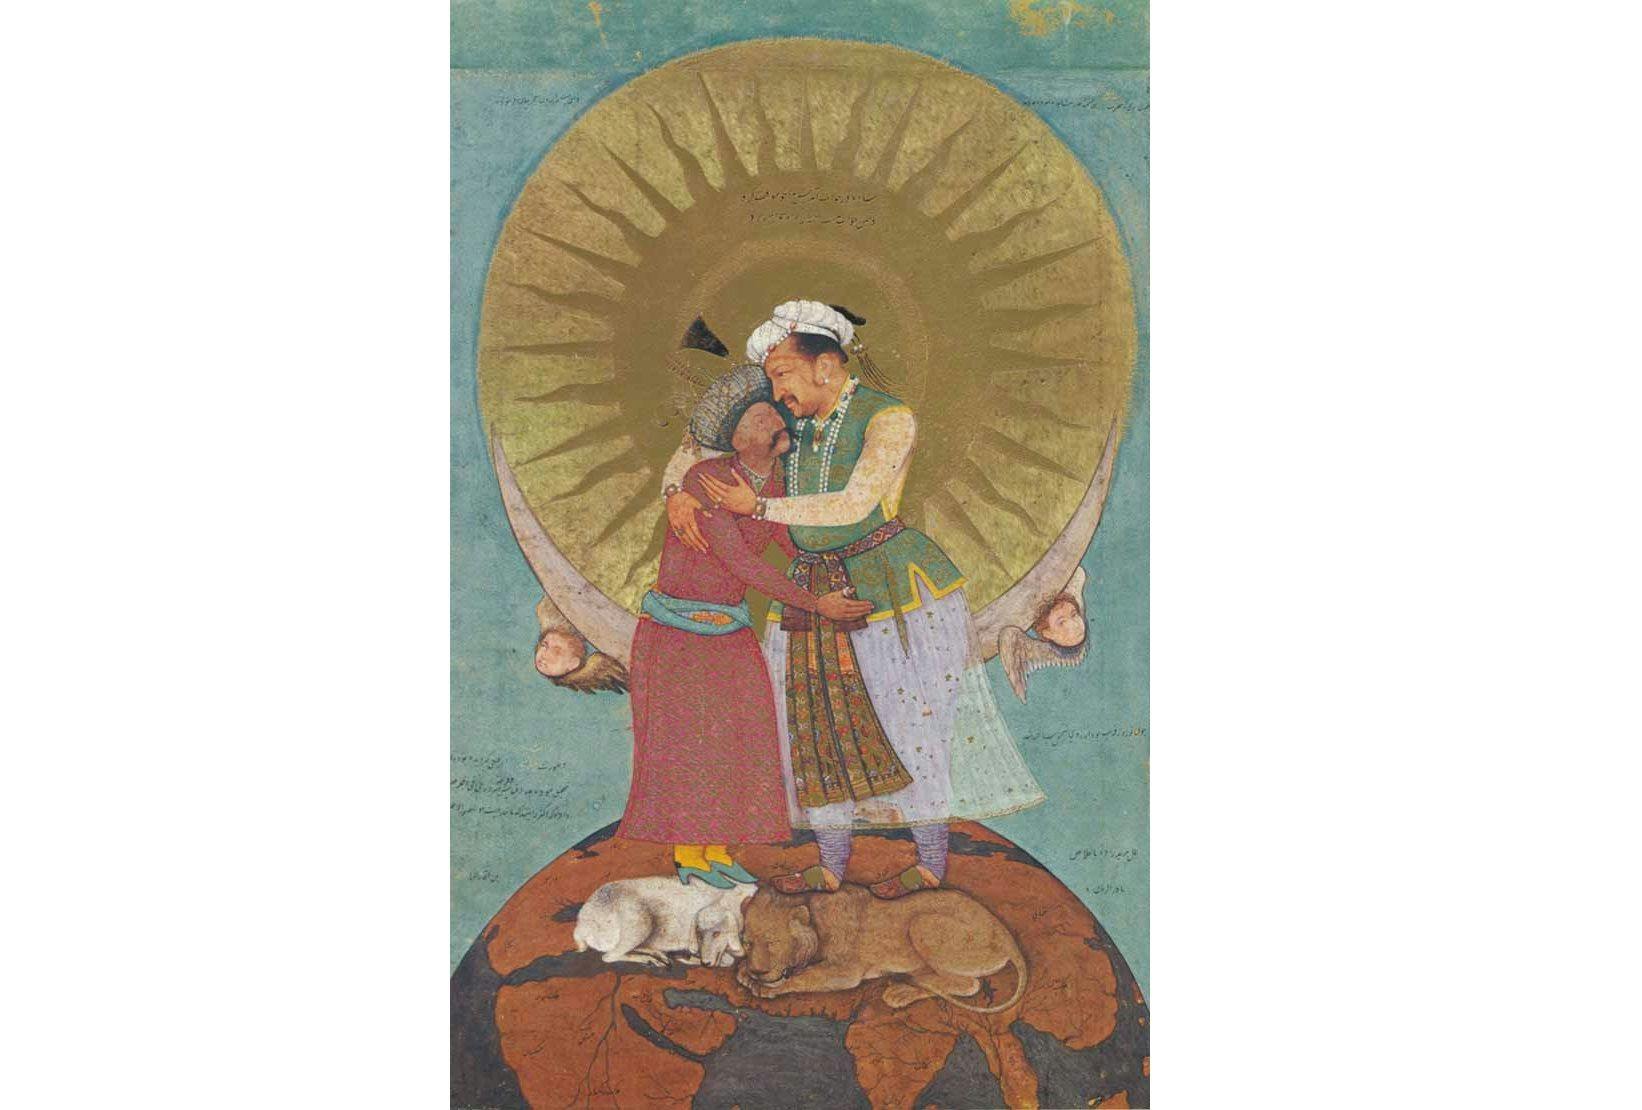 A miniature depicting Jahangir and the Safavid Shah Abbas I, with the lion and the goat as metaphors for Mughal-Safavid relations